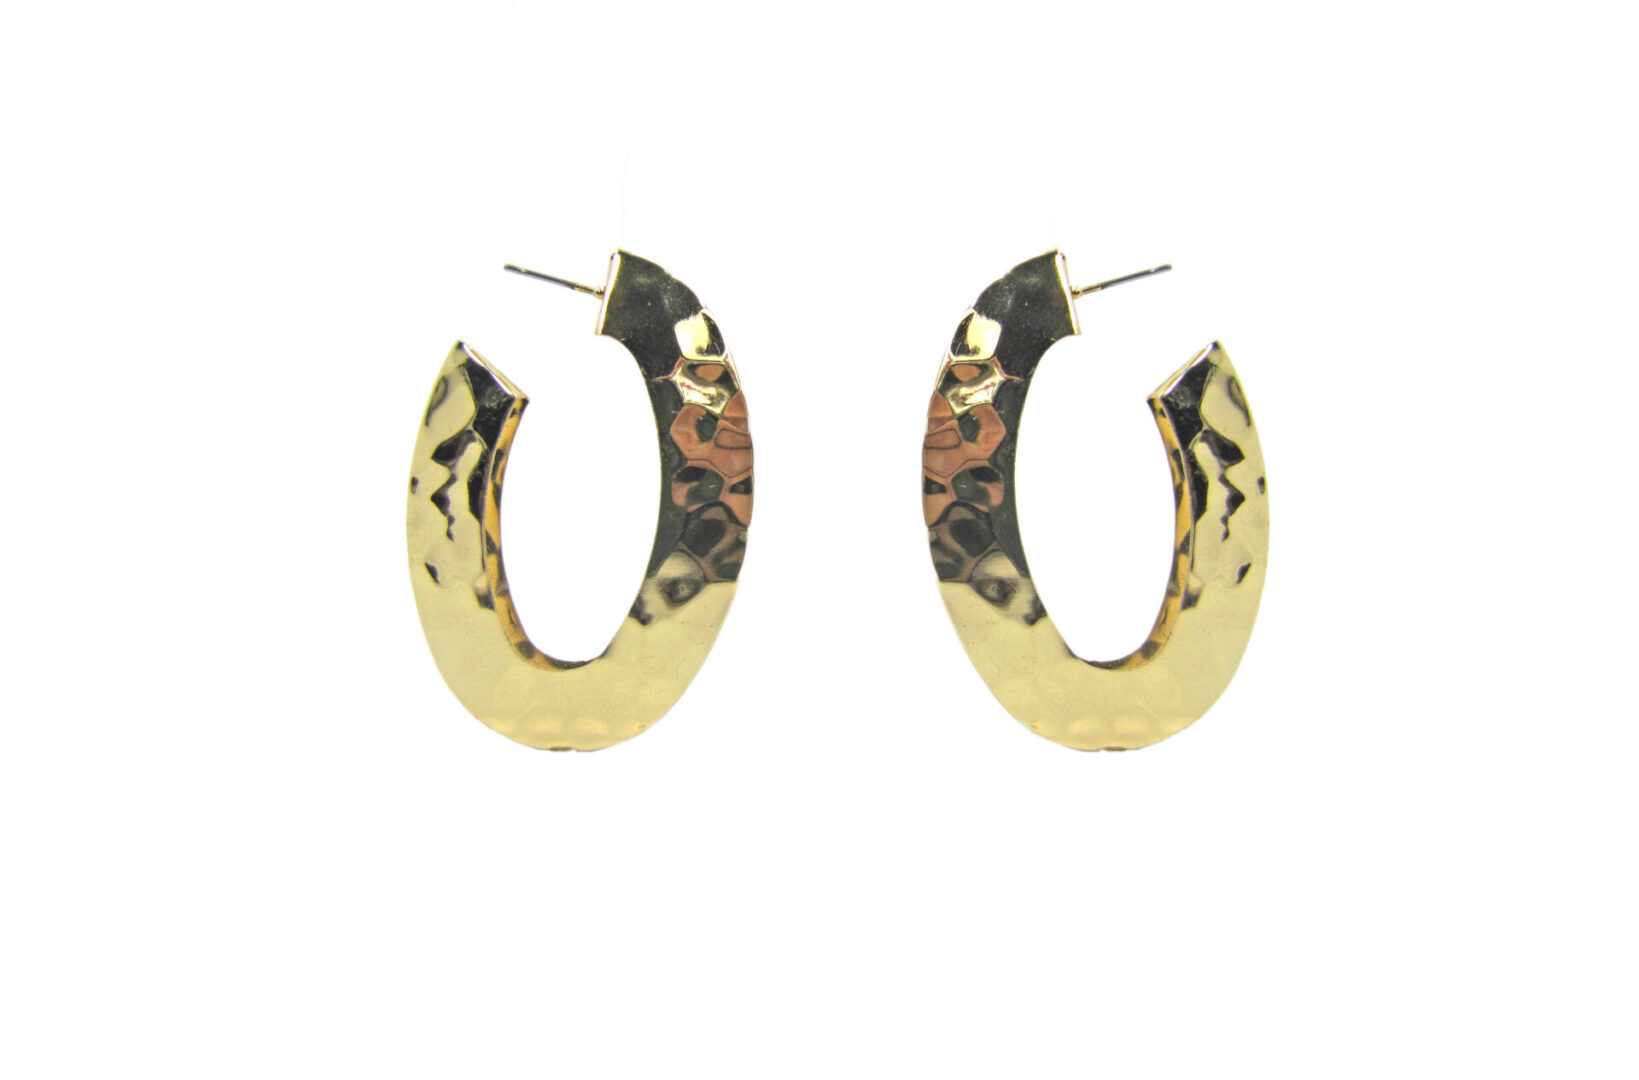 c-shaped earrings with pounded metal texture